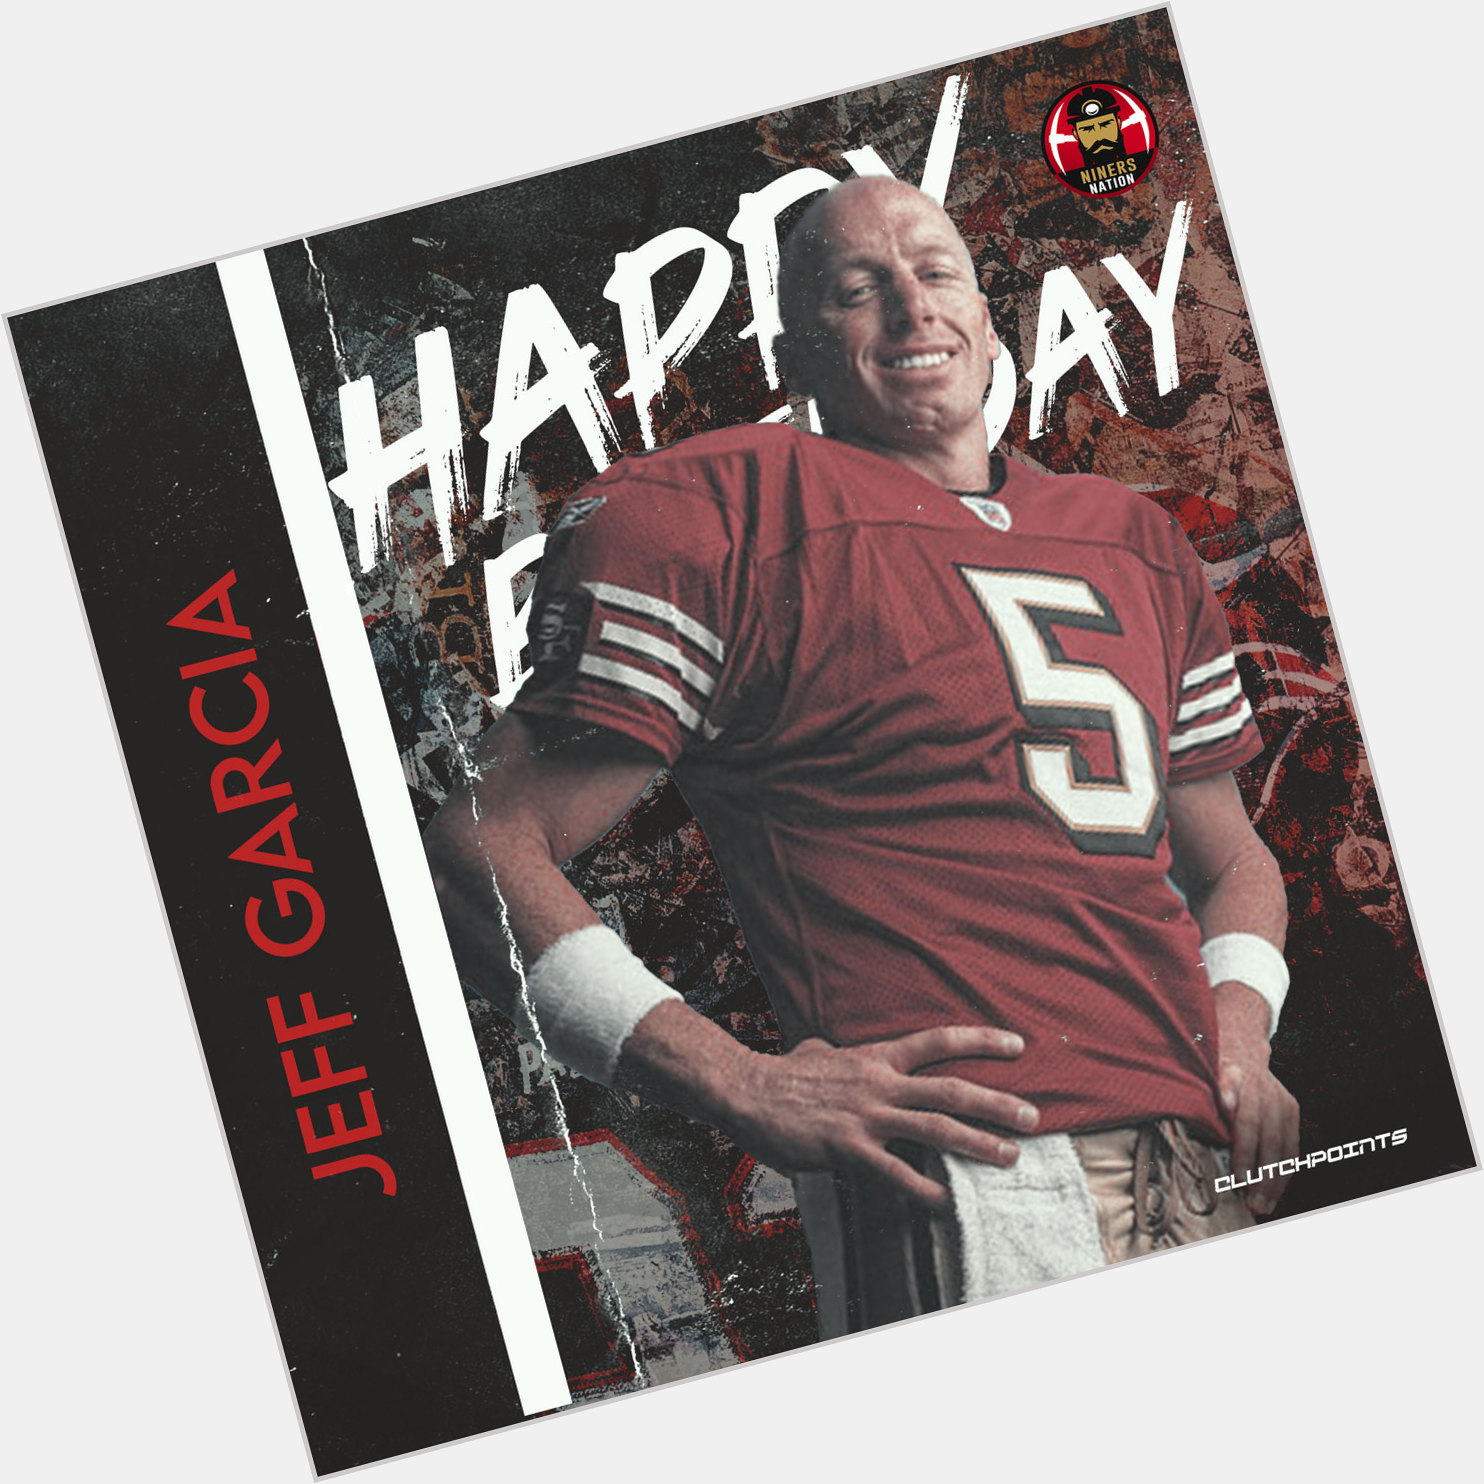 Niners Nation, let\s all wish Jeff Garcia a happy 52nd birthday 